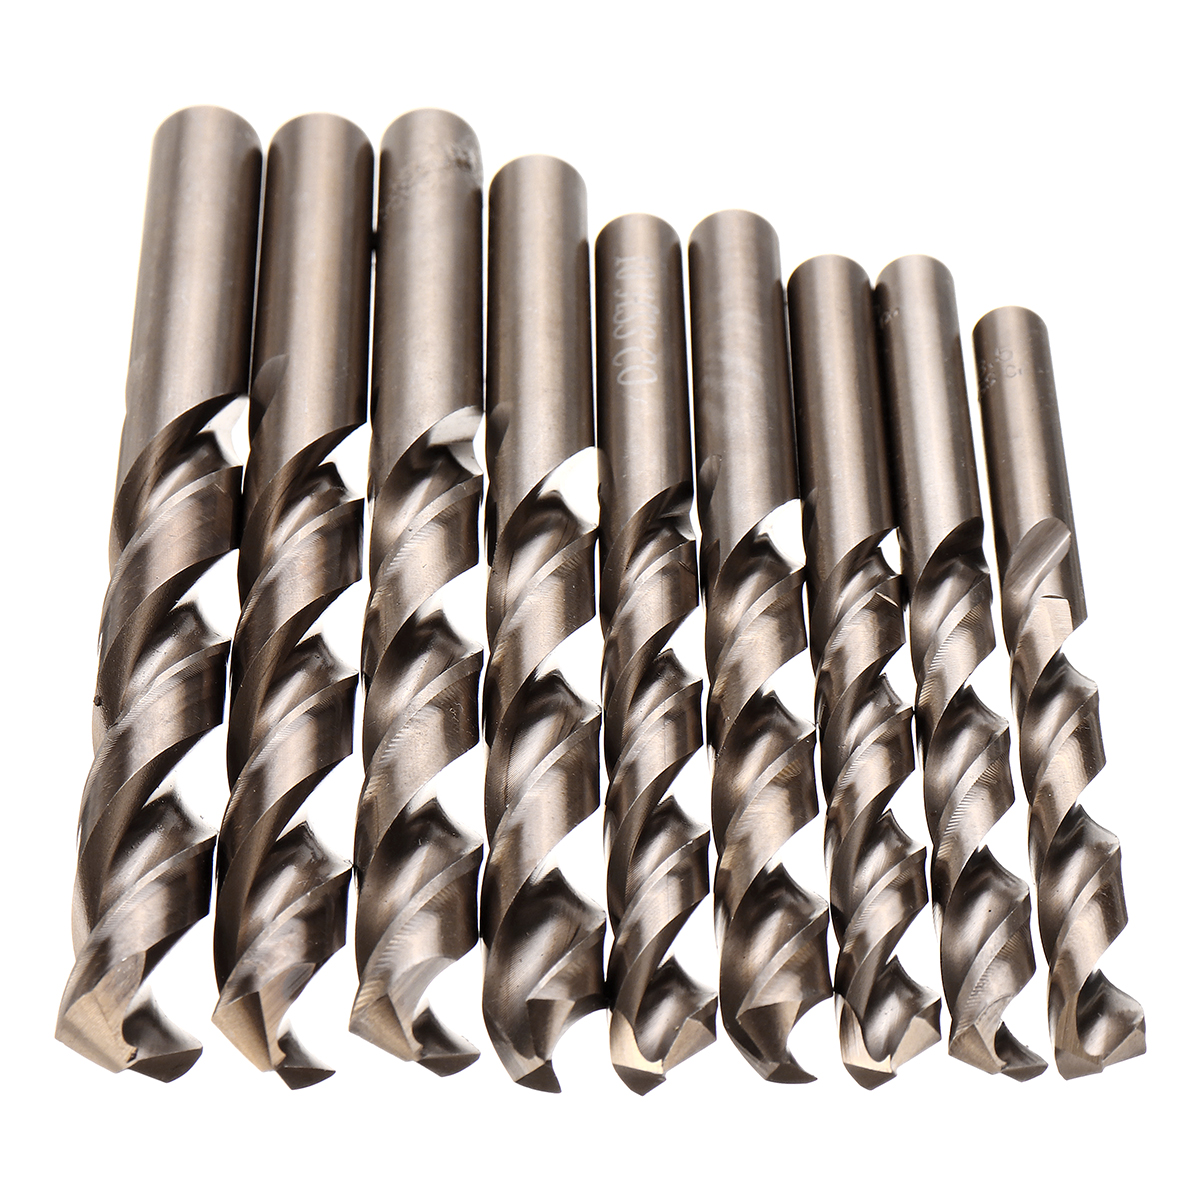 Drilling-Machines-Straigth-Shank-Wood-Tool-Auger-Twsist-Drill-Bit-Phi85-Phi13-1771356-8